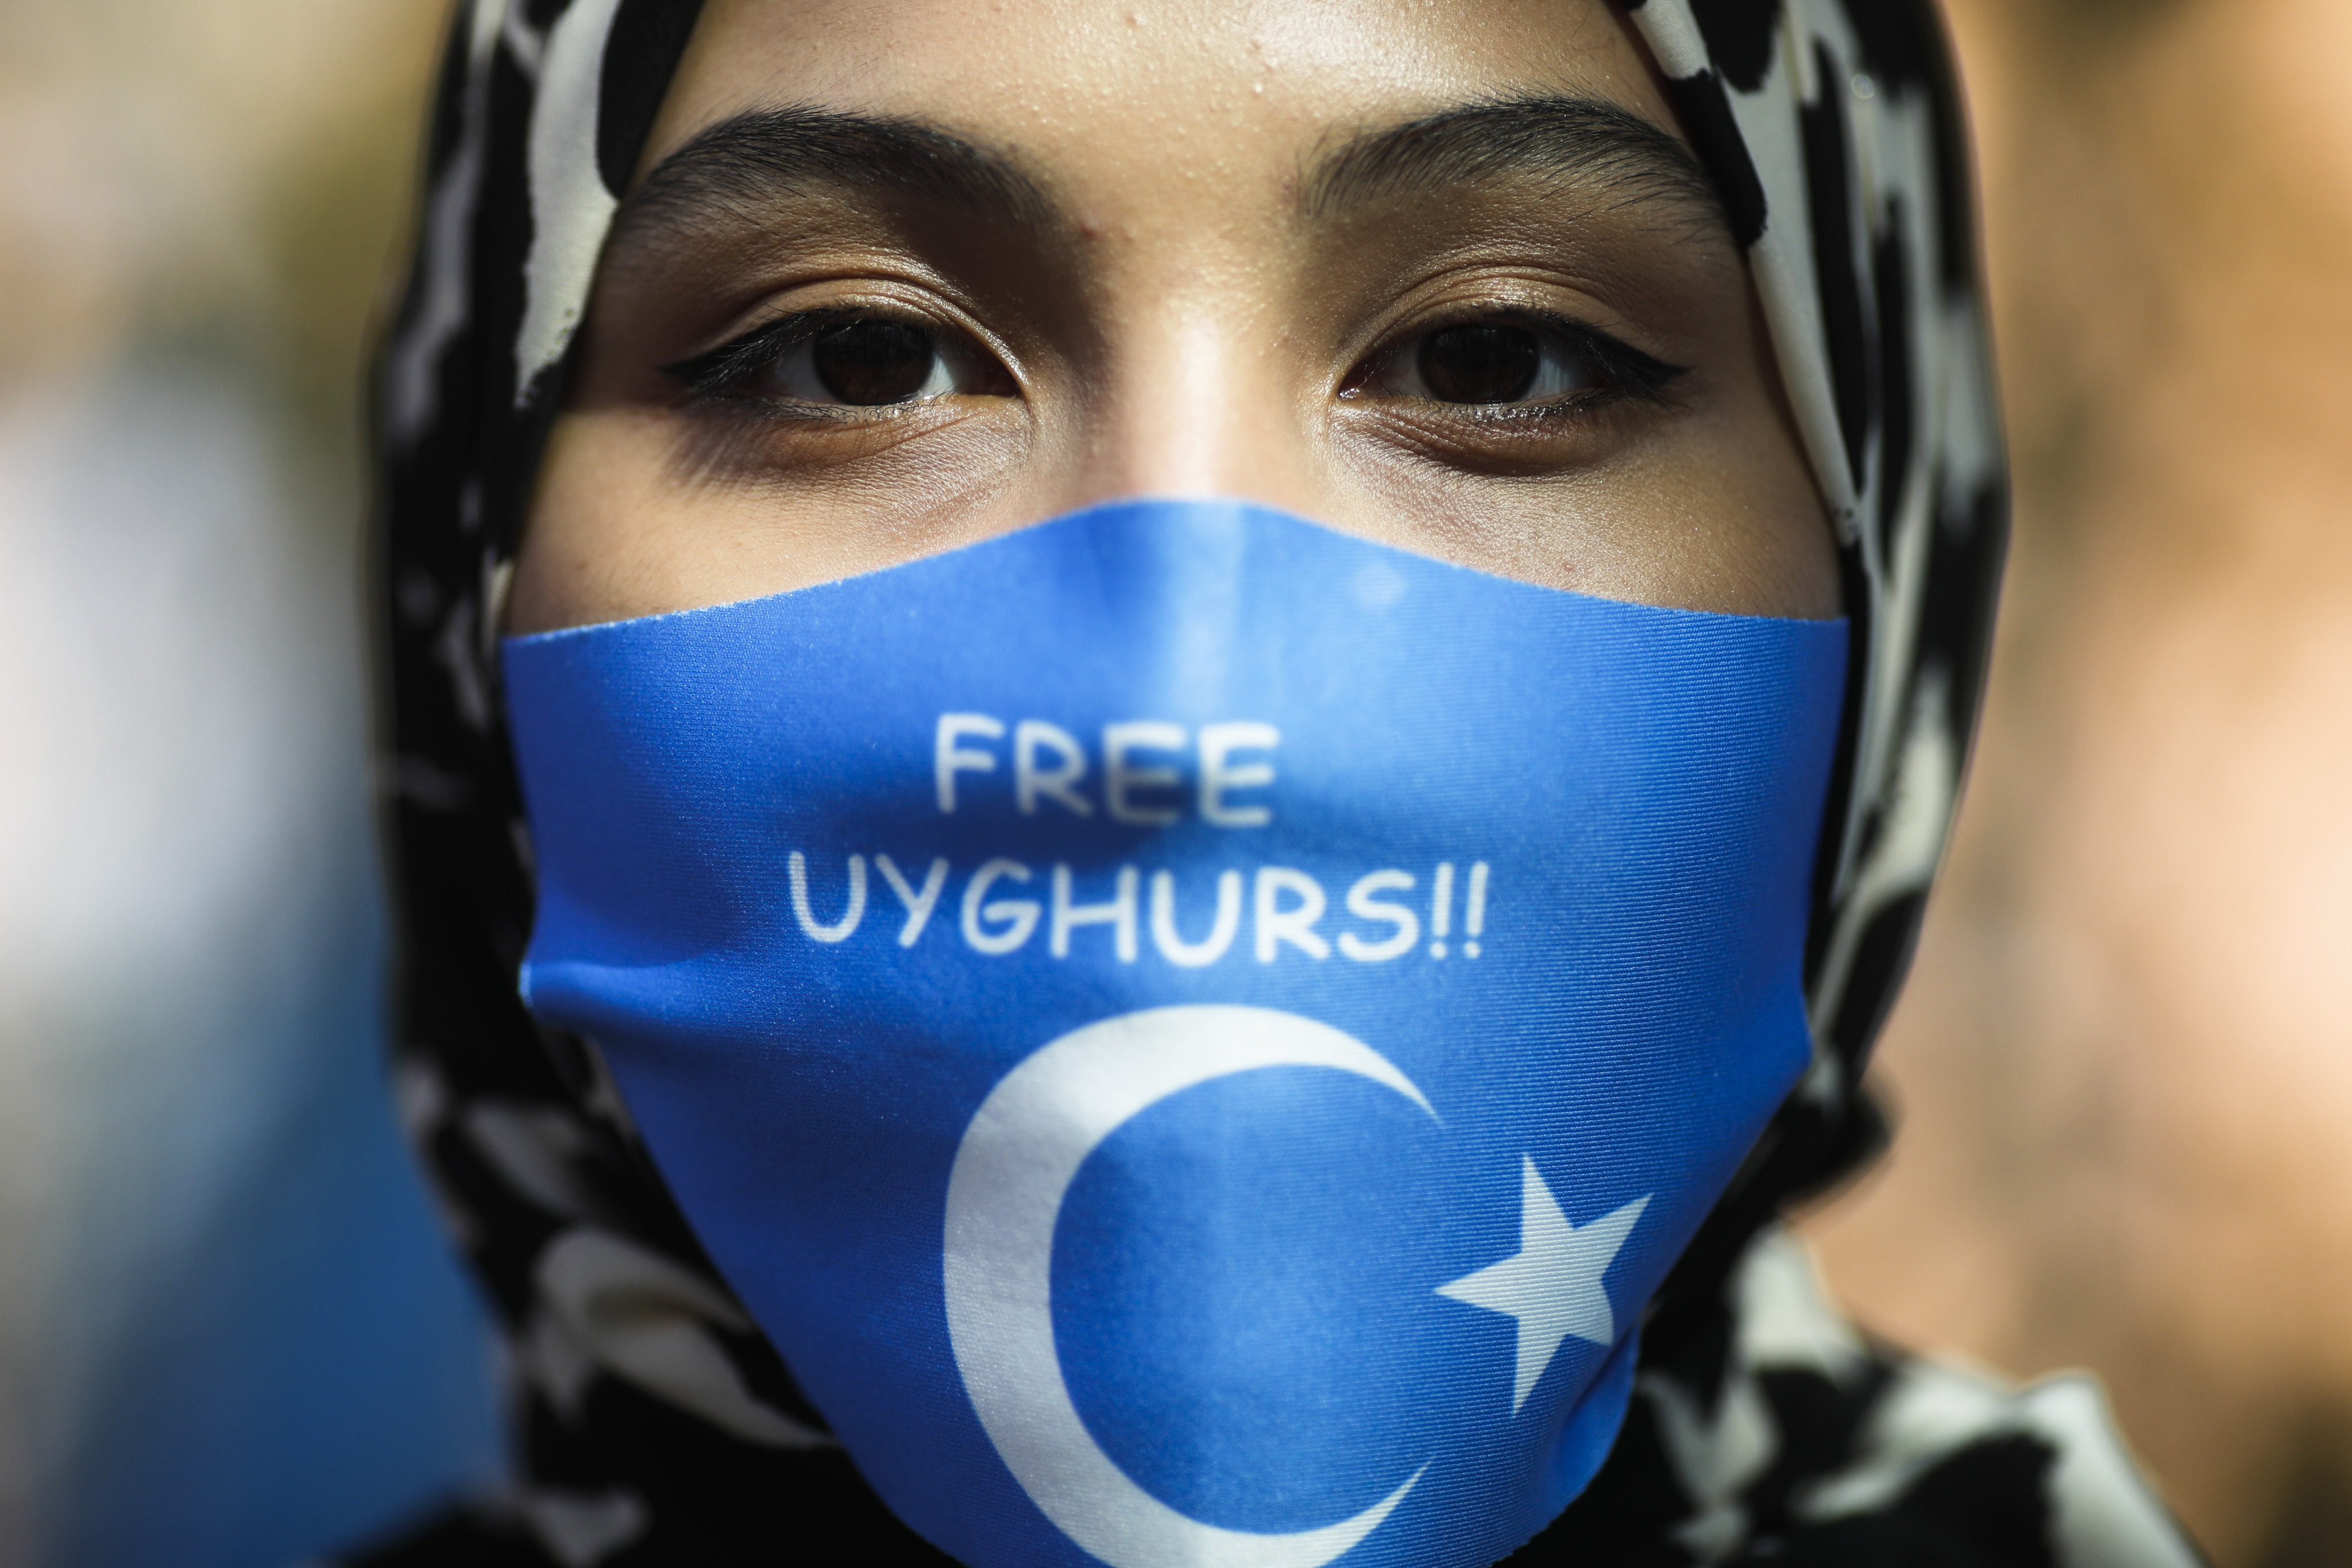 A woman wears a face mask with a slogan supporting Uygurs as she attends a protest in Berlin during a visit by Chinese Foreign Minister Wang Yi in September 2020. Photo: AP